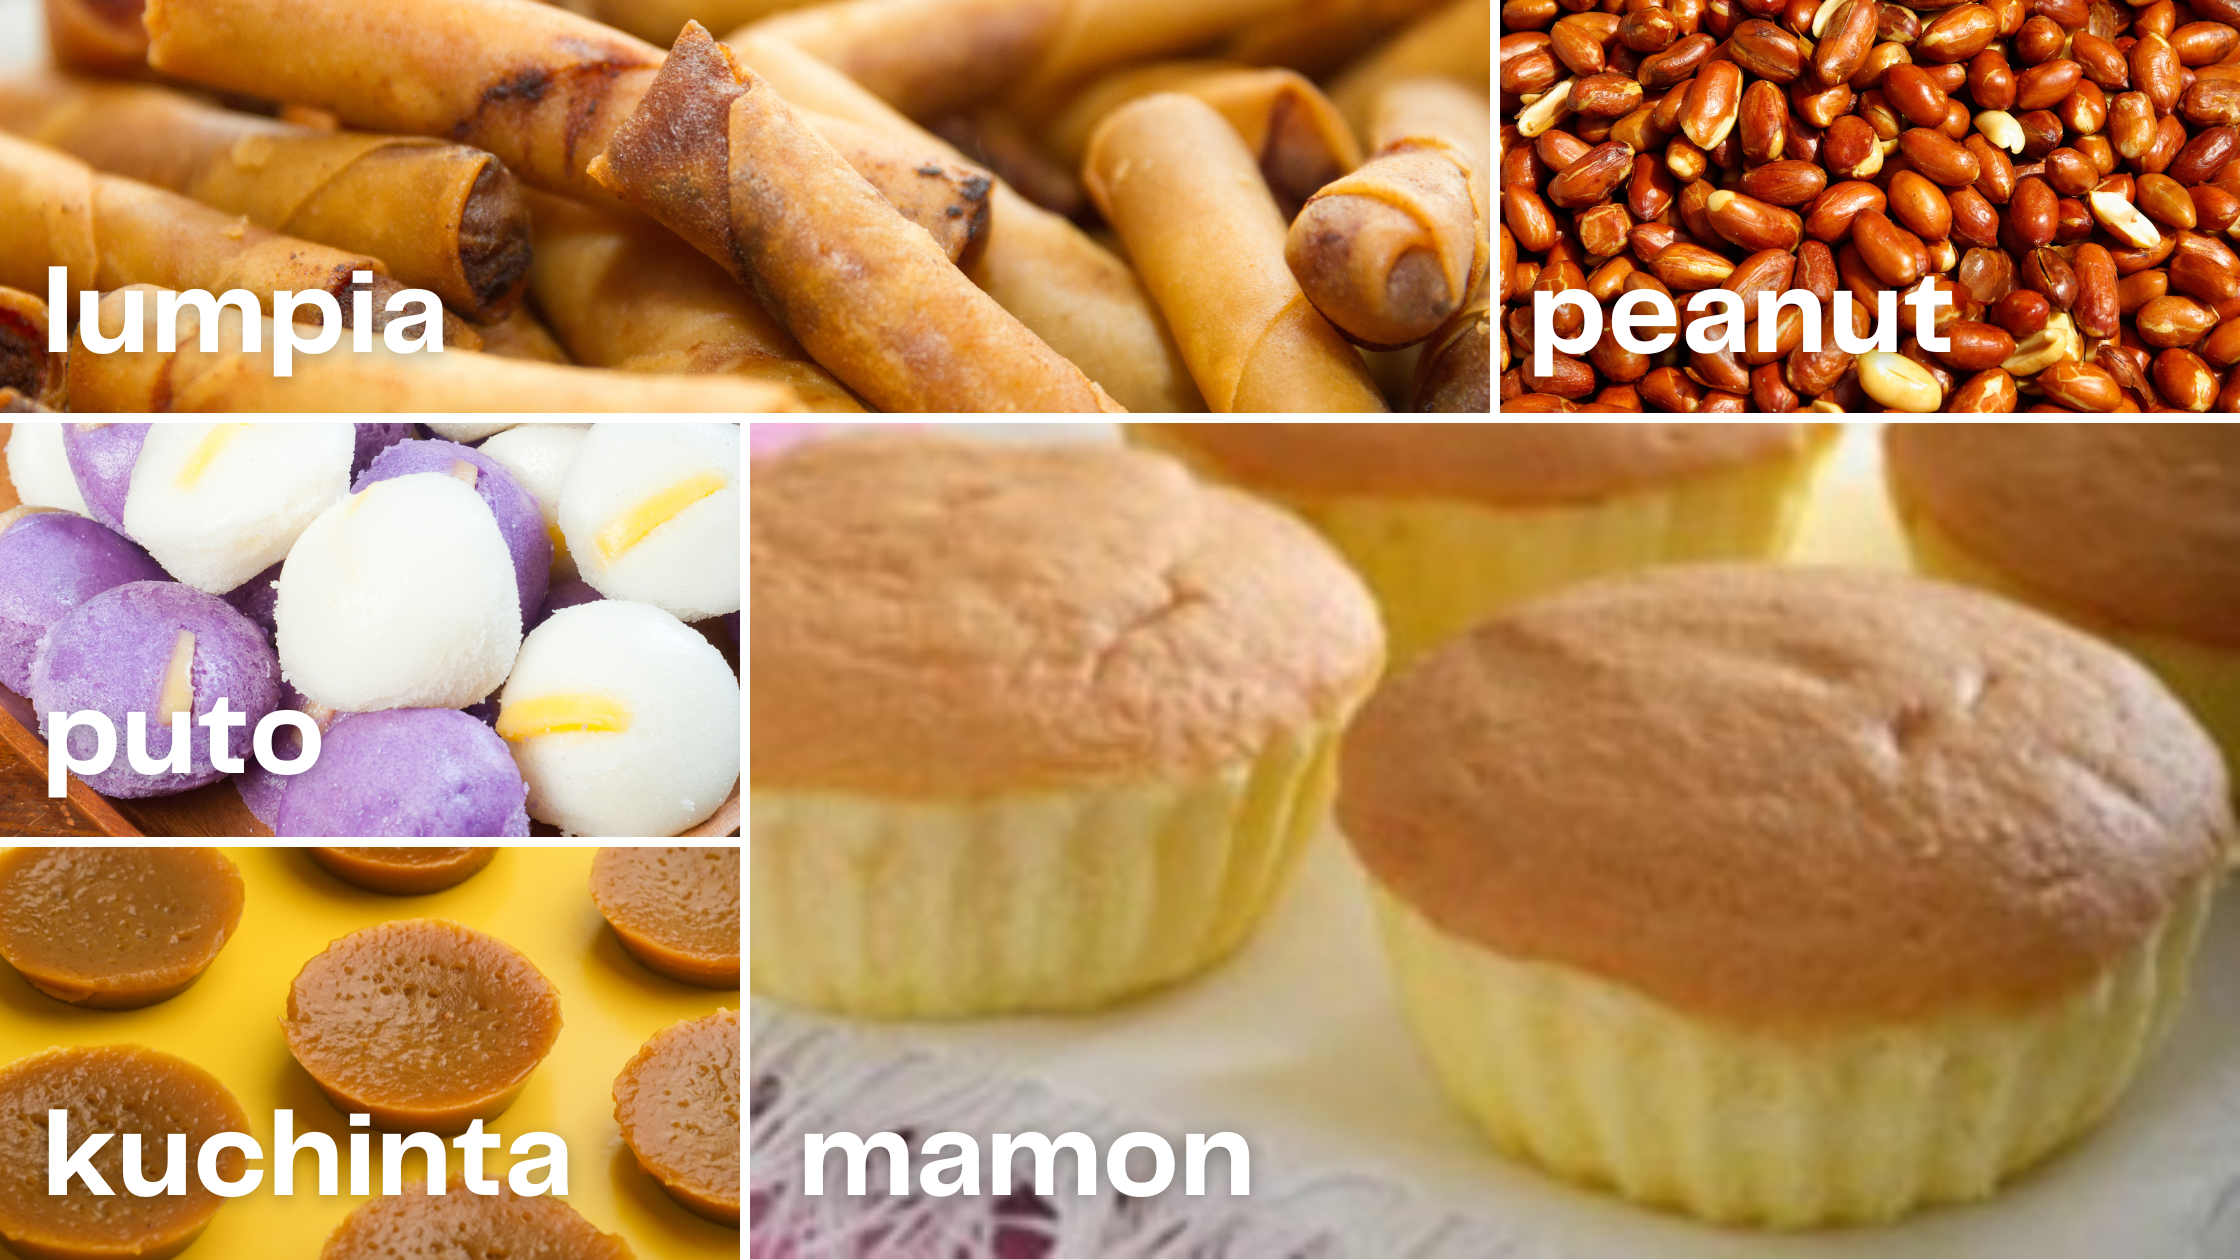 10 Popular Foods You Will Find at a Filipino Funeral